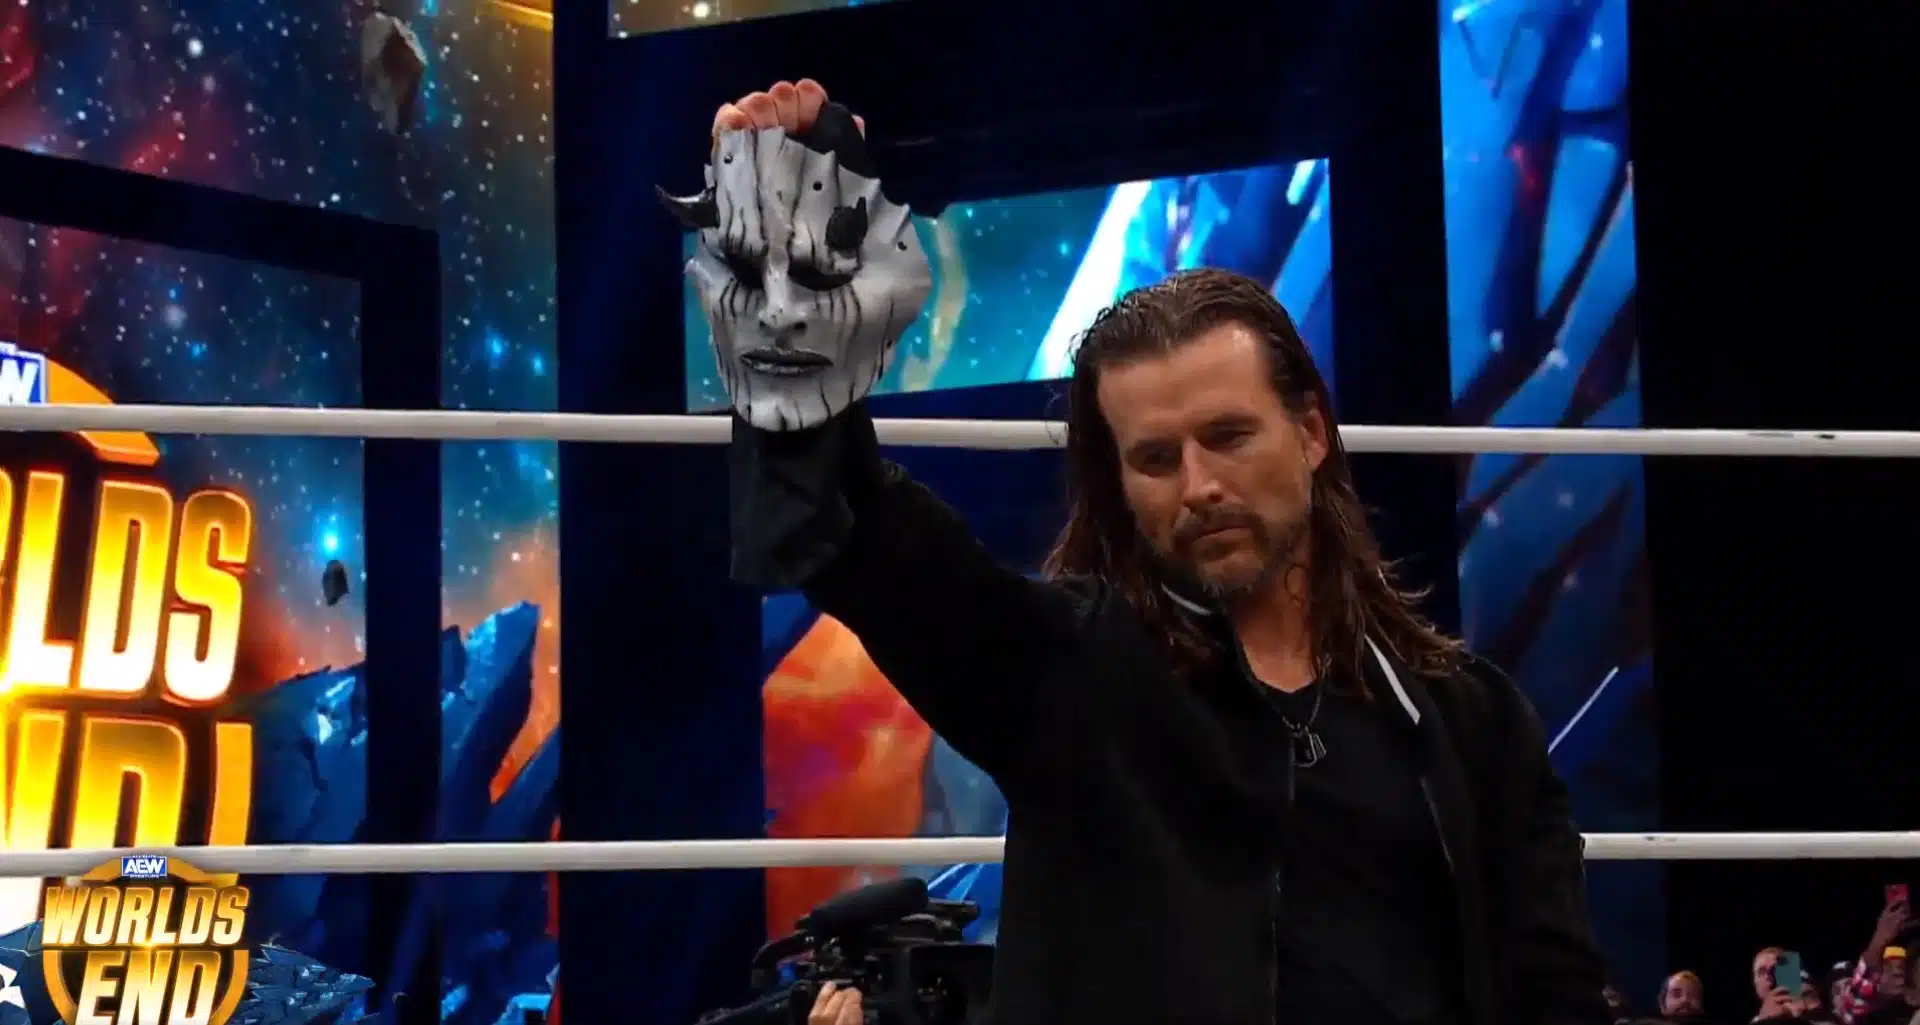 Adam Cole is holding The Devil mask to confirm that he is this mysterious character